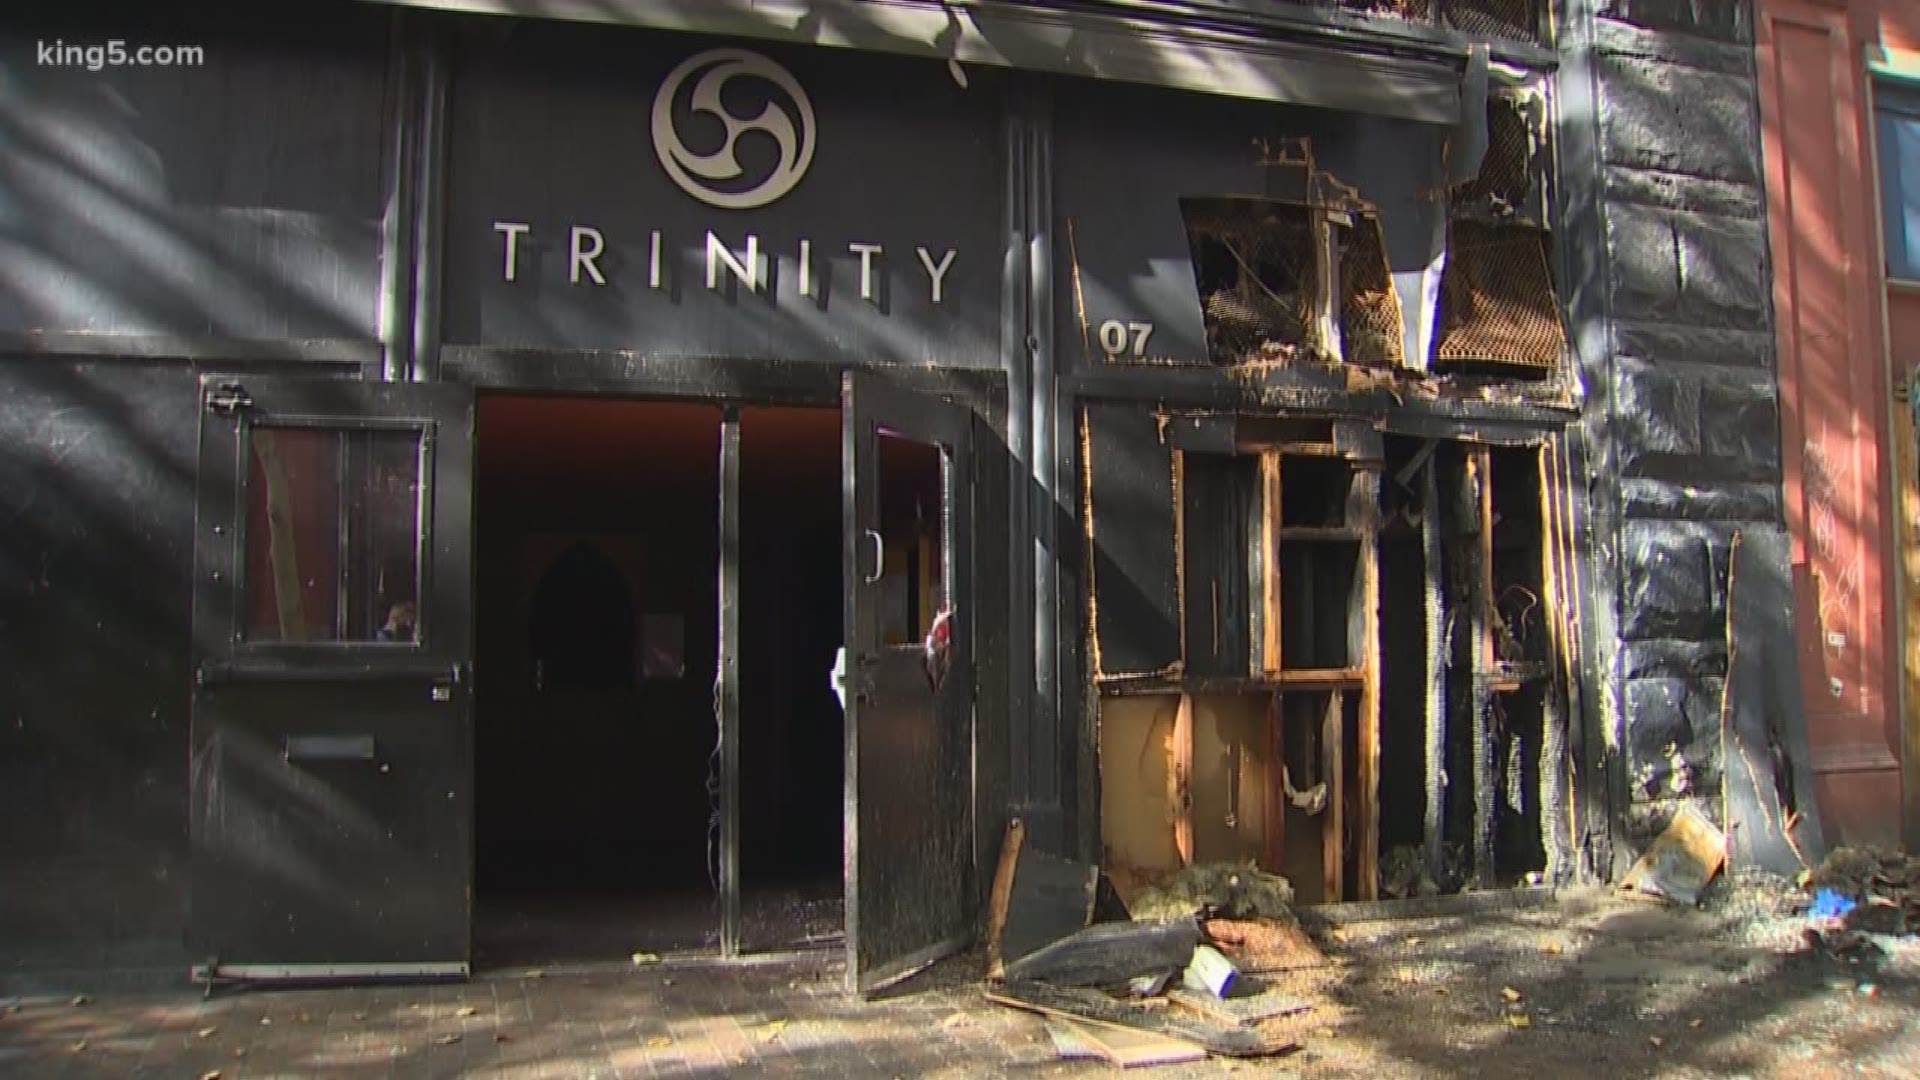 Investigators say a fire was intentionally started at a nightclub in Seattle's historic Pioneer Square.